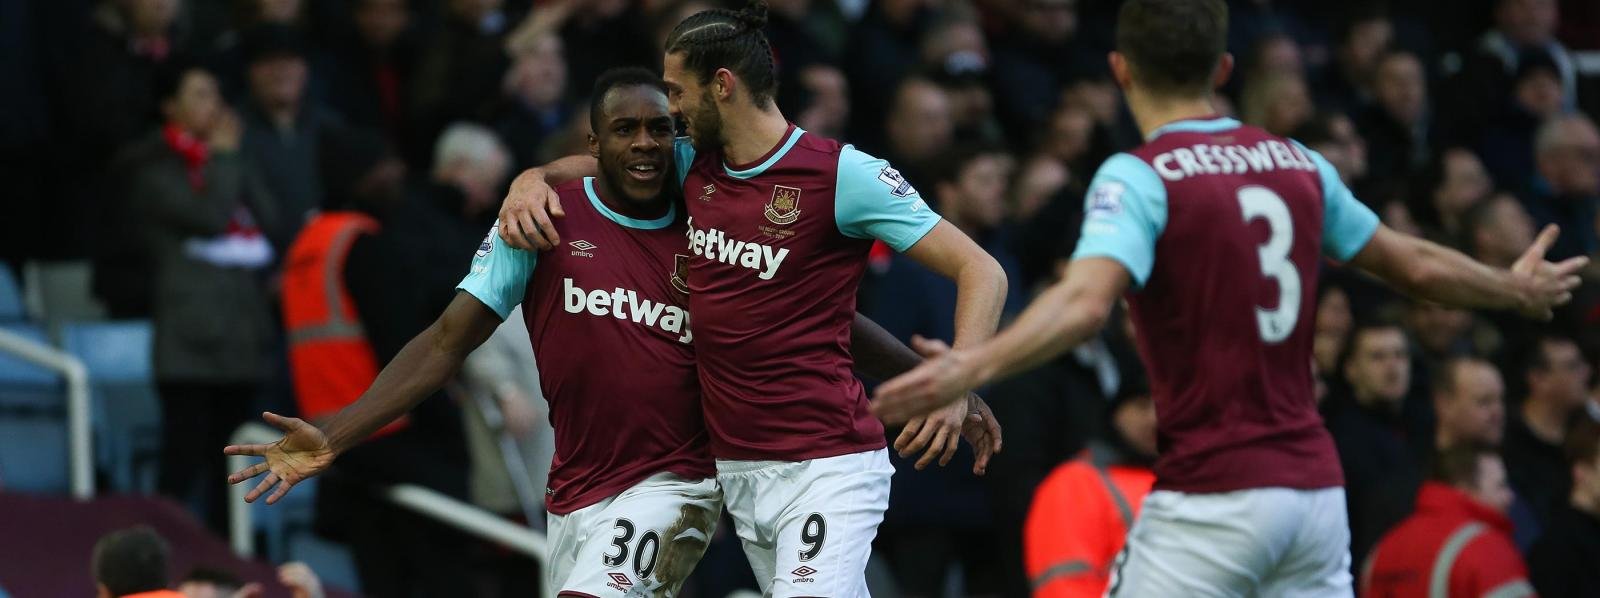 Can West Ham’s Class of ’16 match ‘the boys of ’86?’